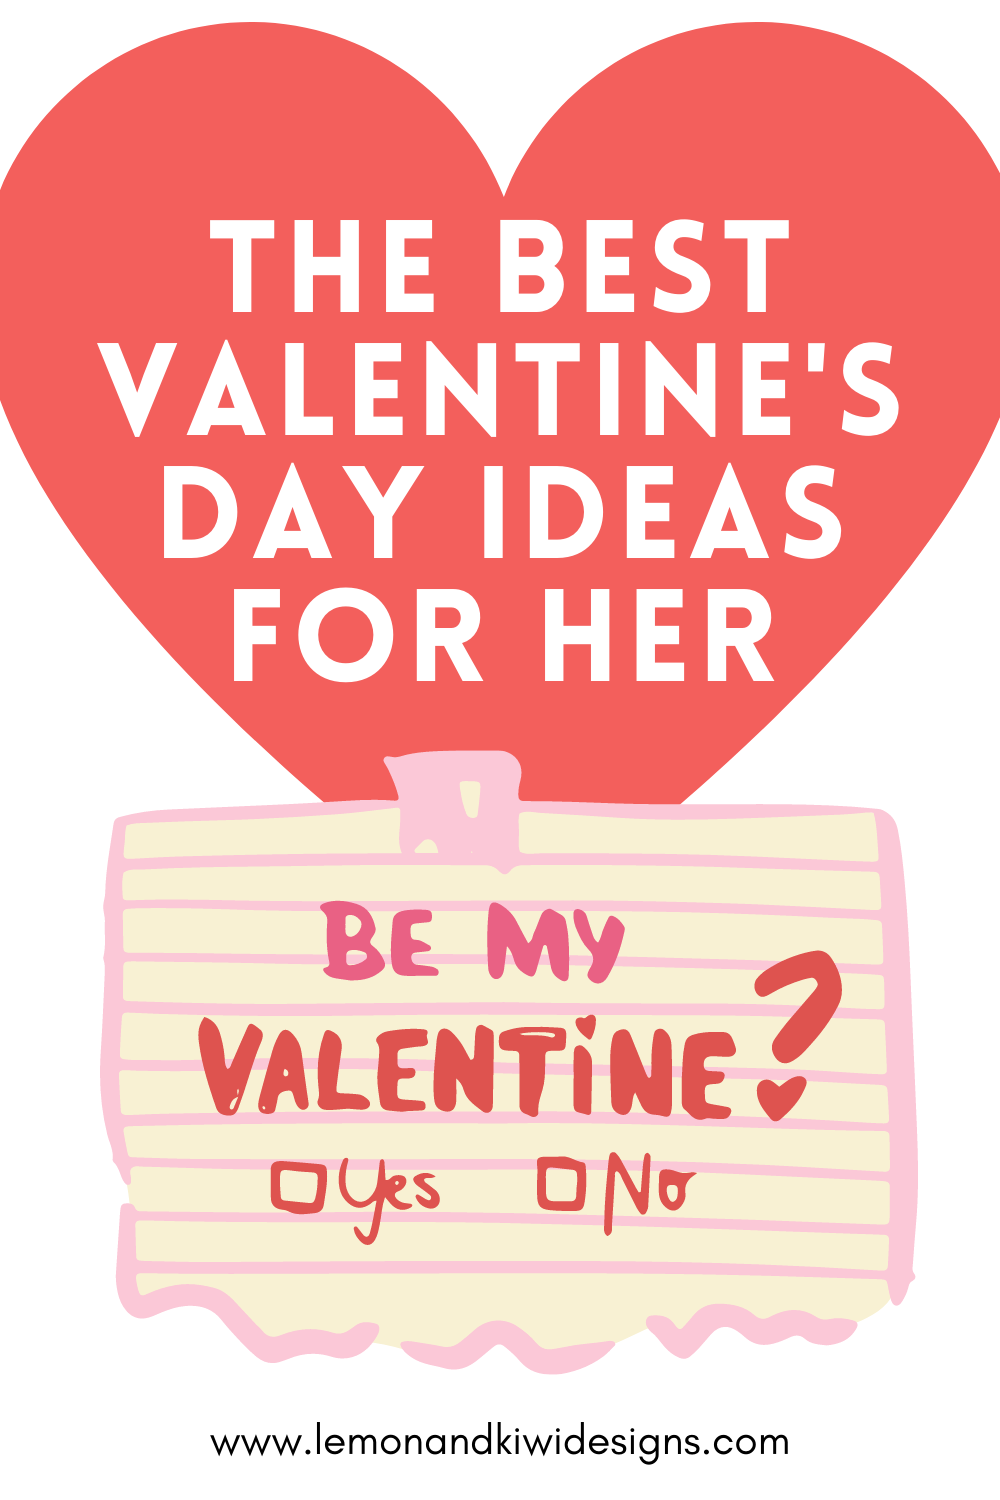 The Best Valentine’s Day Ideas For Her